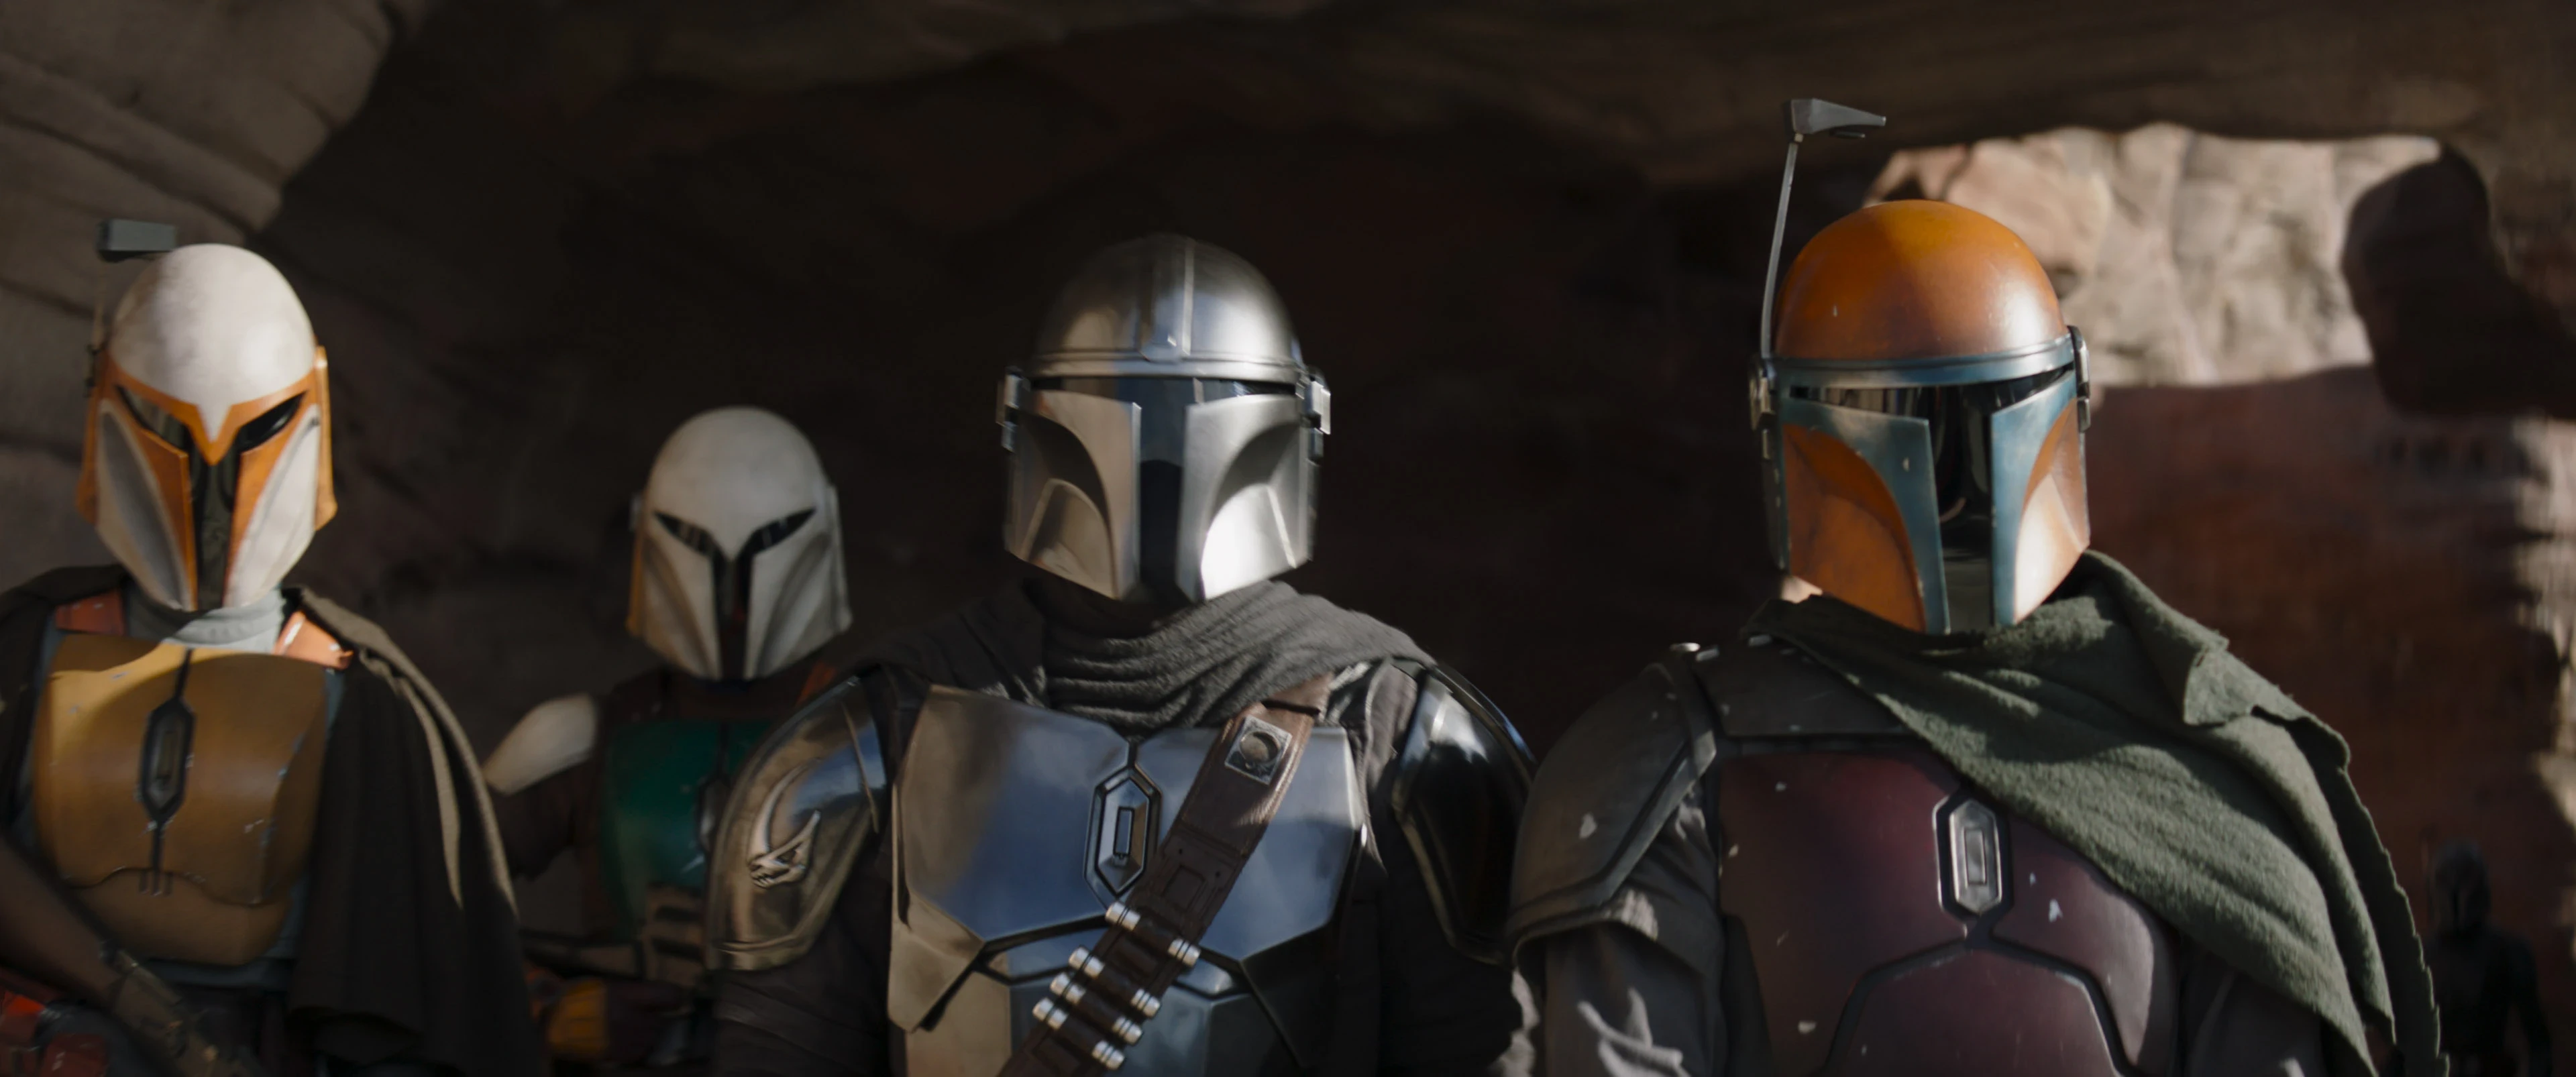 Play as the Mandalorian in this Star Wars Battlefront 2 mod